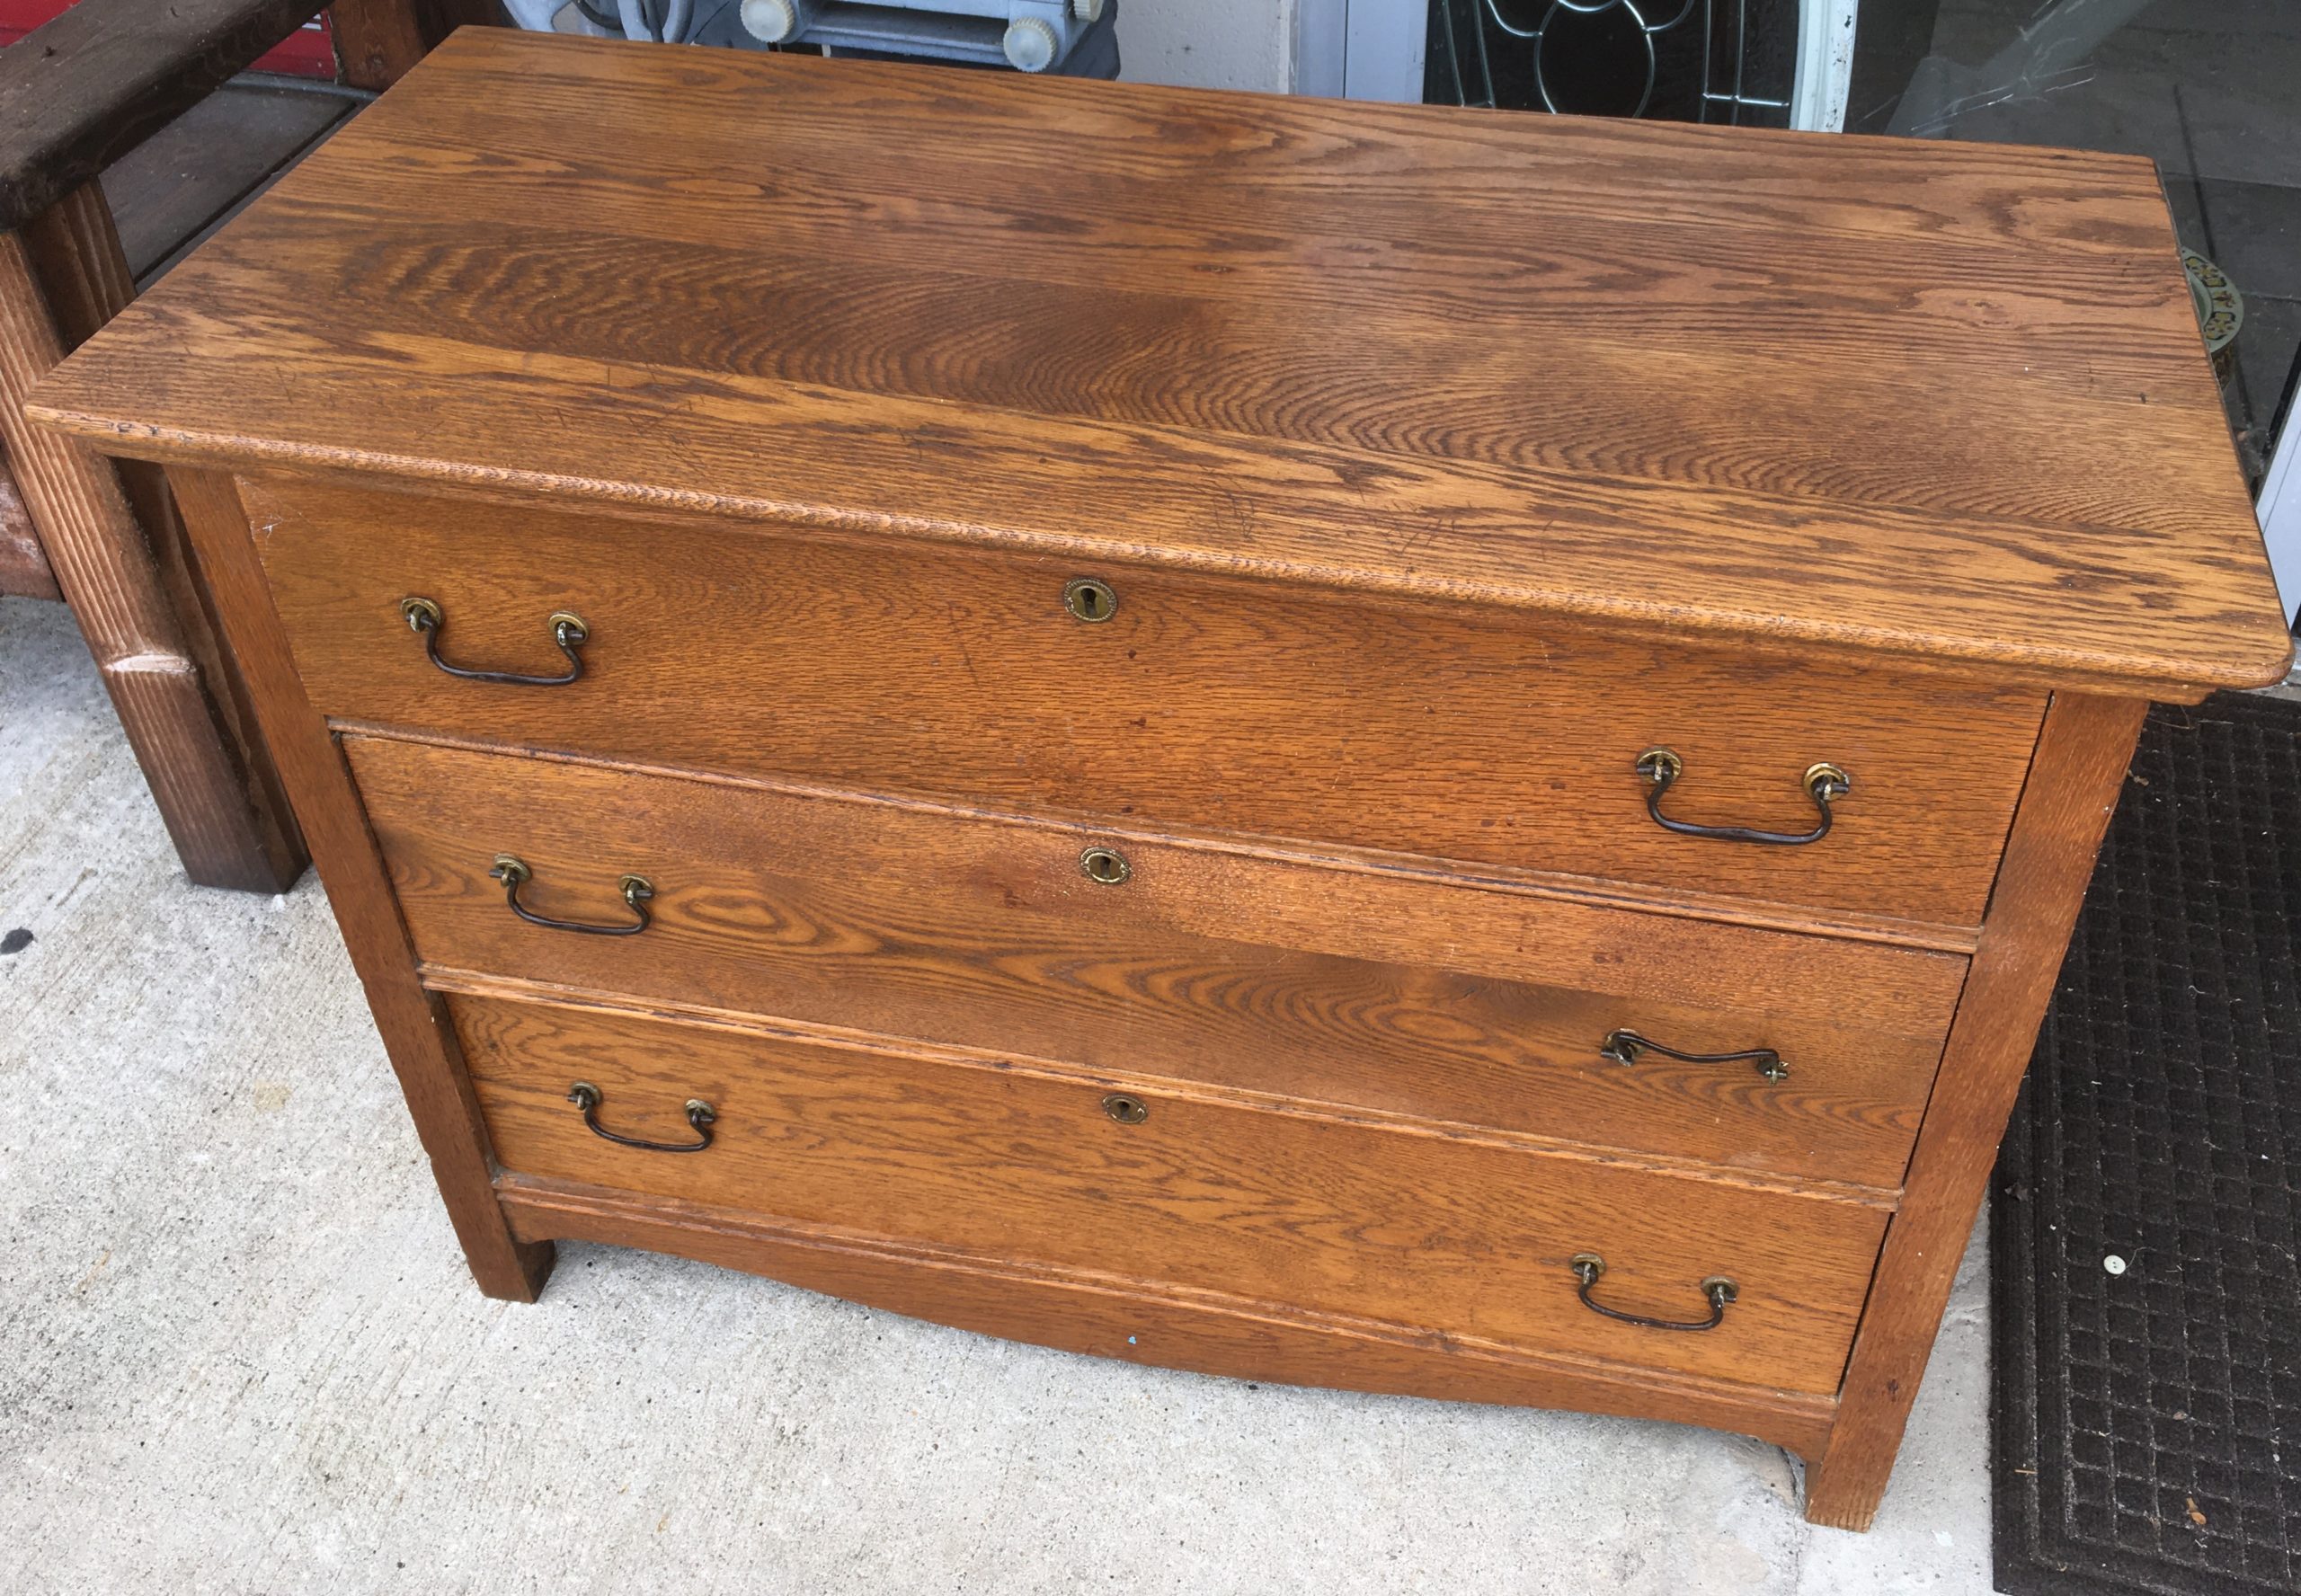 Vintage Small Wooden Dresser Chest of Drawers